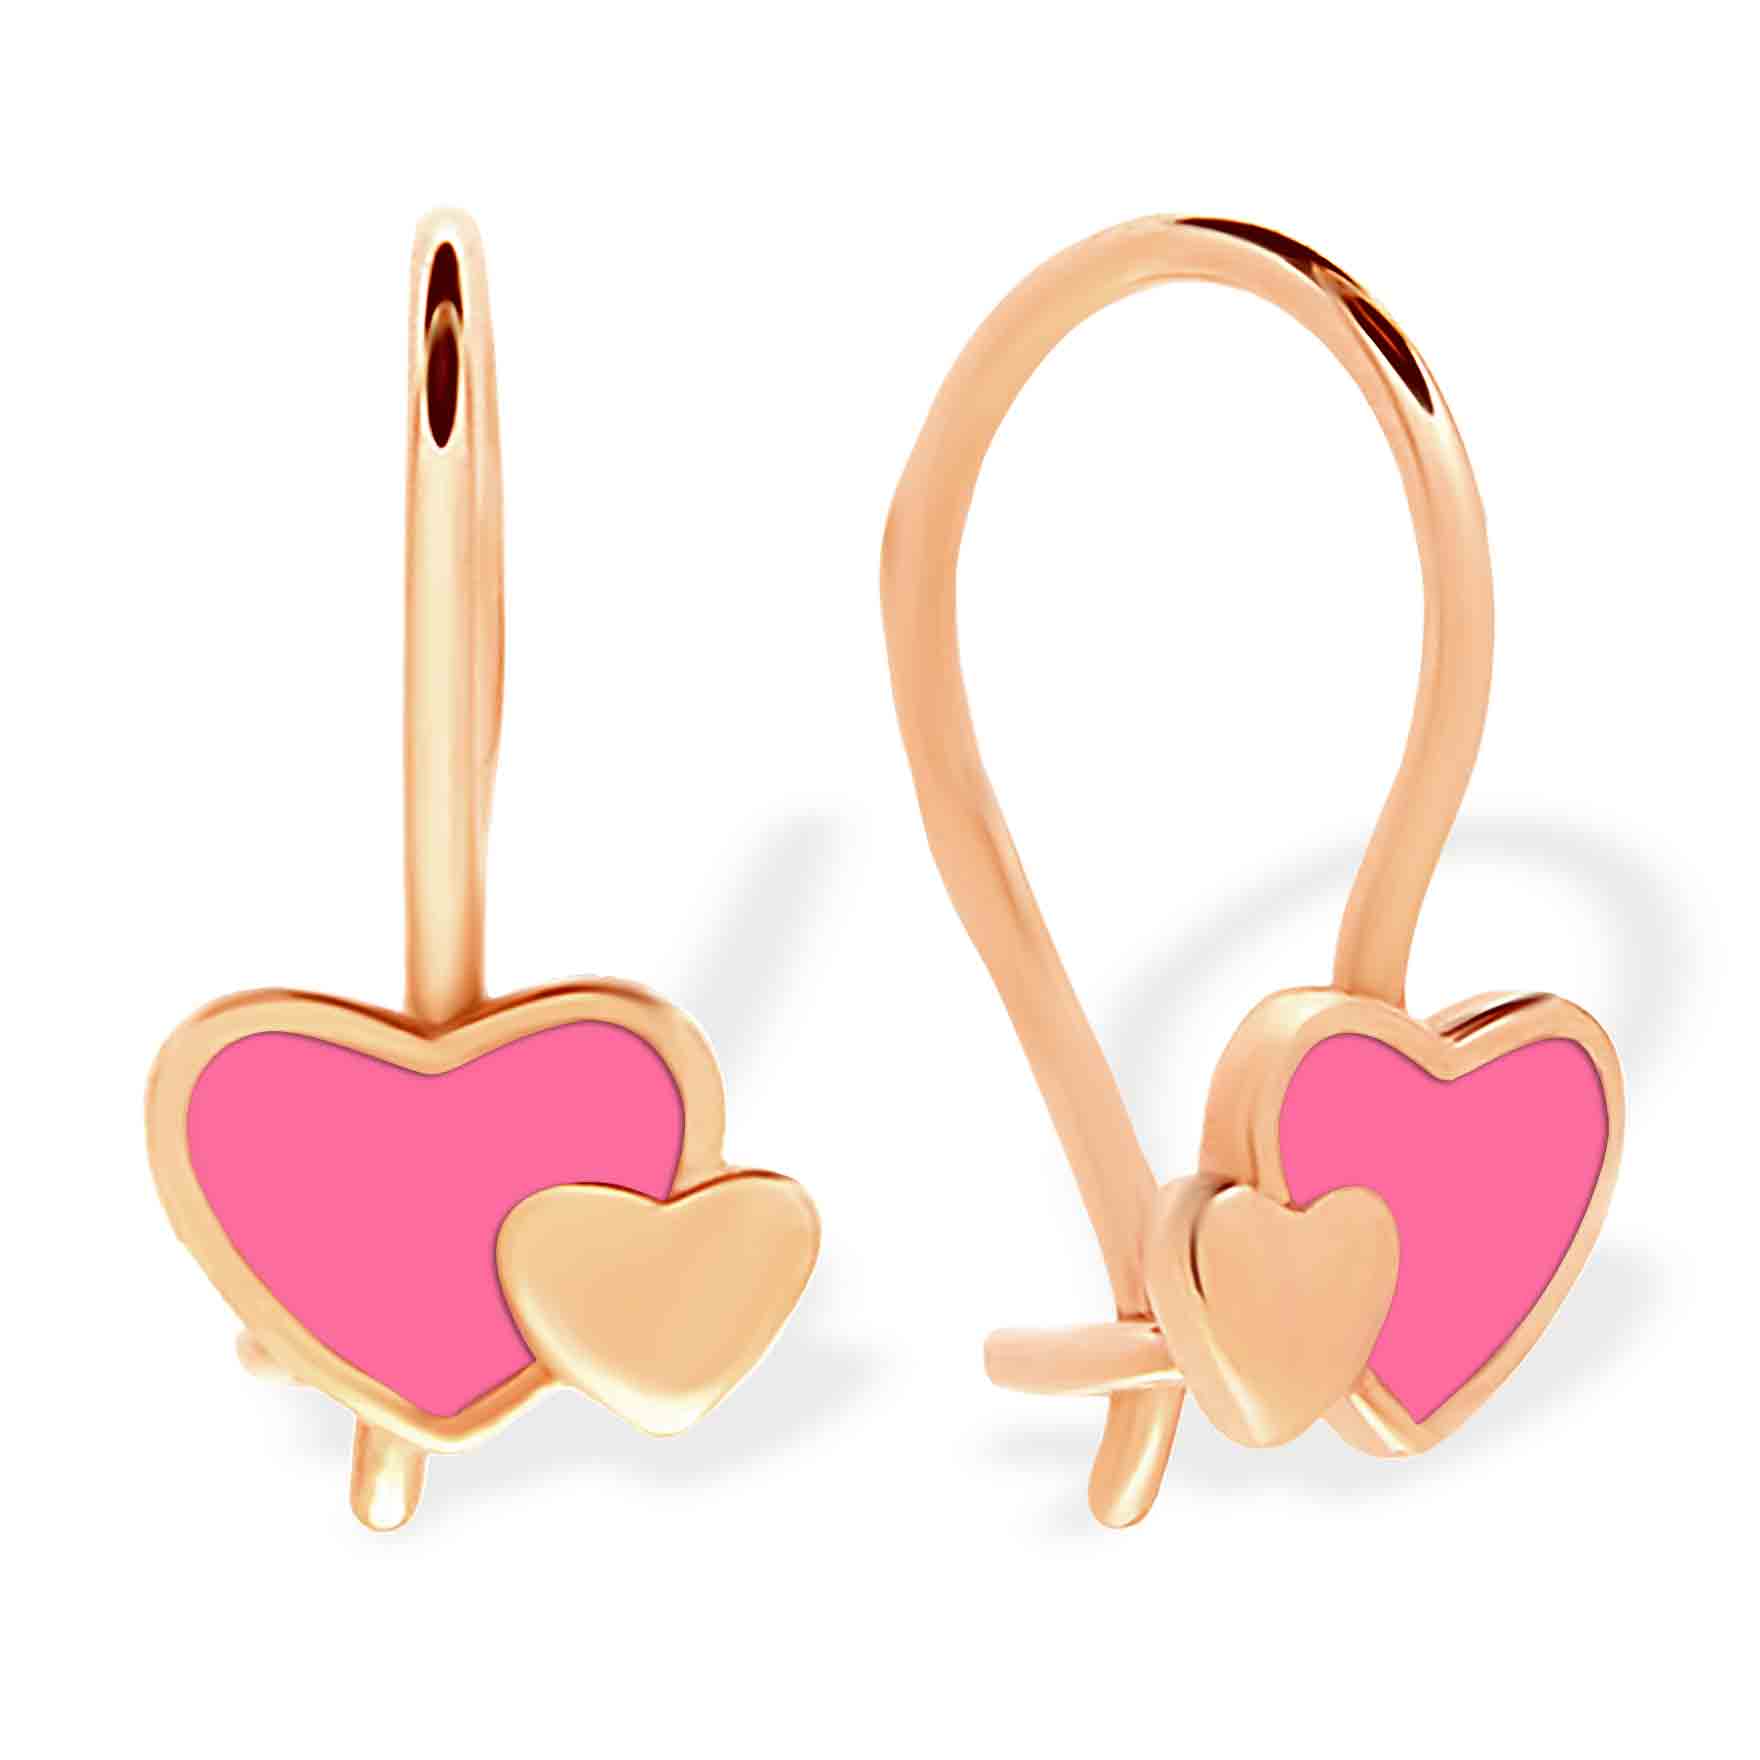 Details about   Gold Finish Red and White Enamel Heart Children's Hoop Earrings 